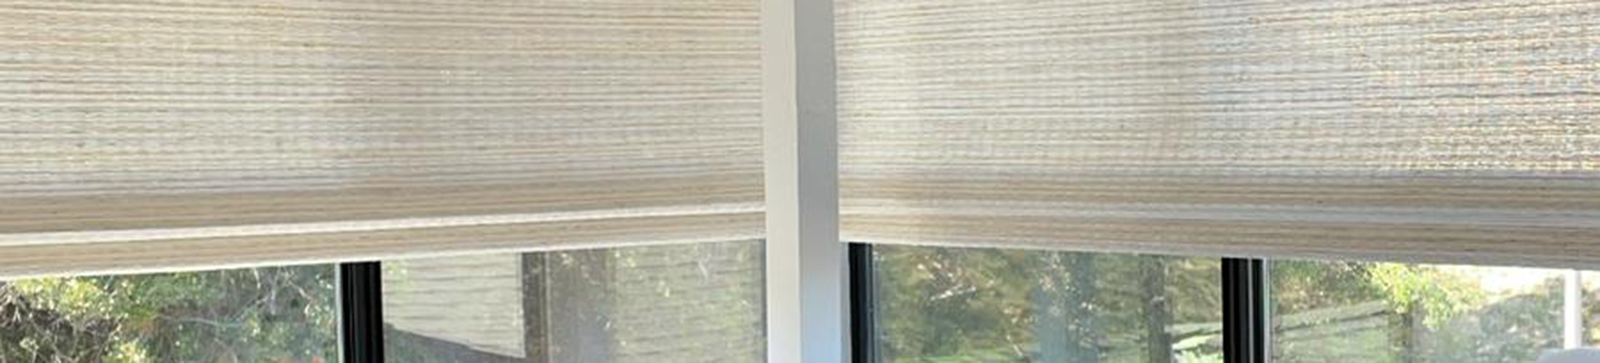 Woven Wood Shades for Kids Bedroom in Lennox